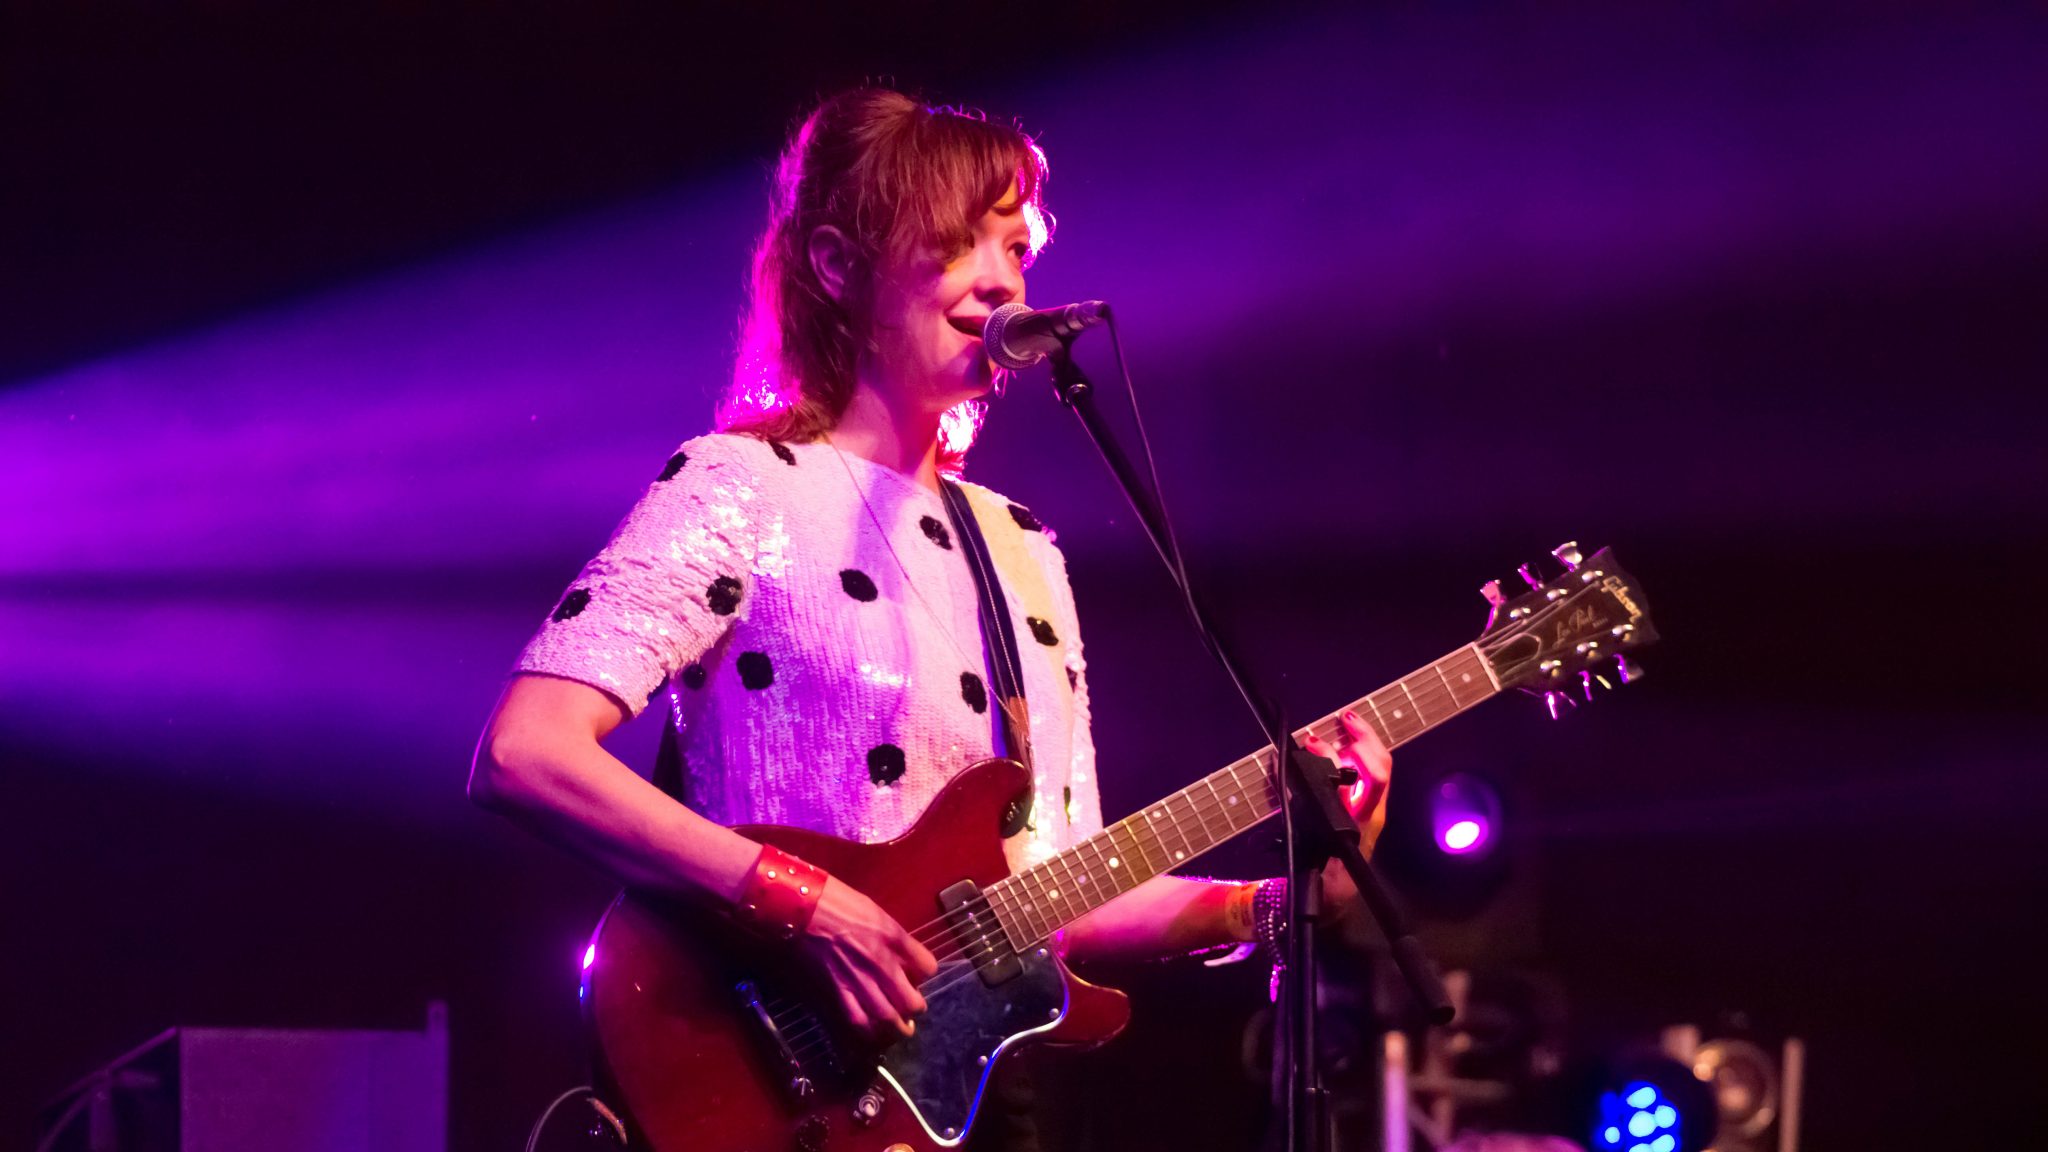 Mary Timony, vocalist and guitarist of the American band Ex Hex, at NOS Primavera Sound in Porto in 2015.